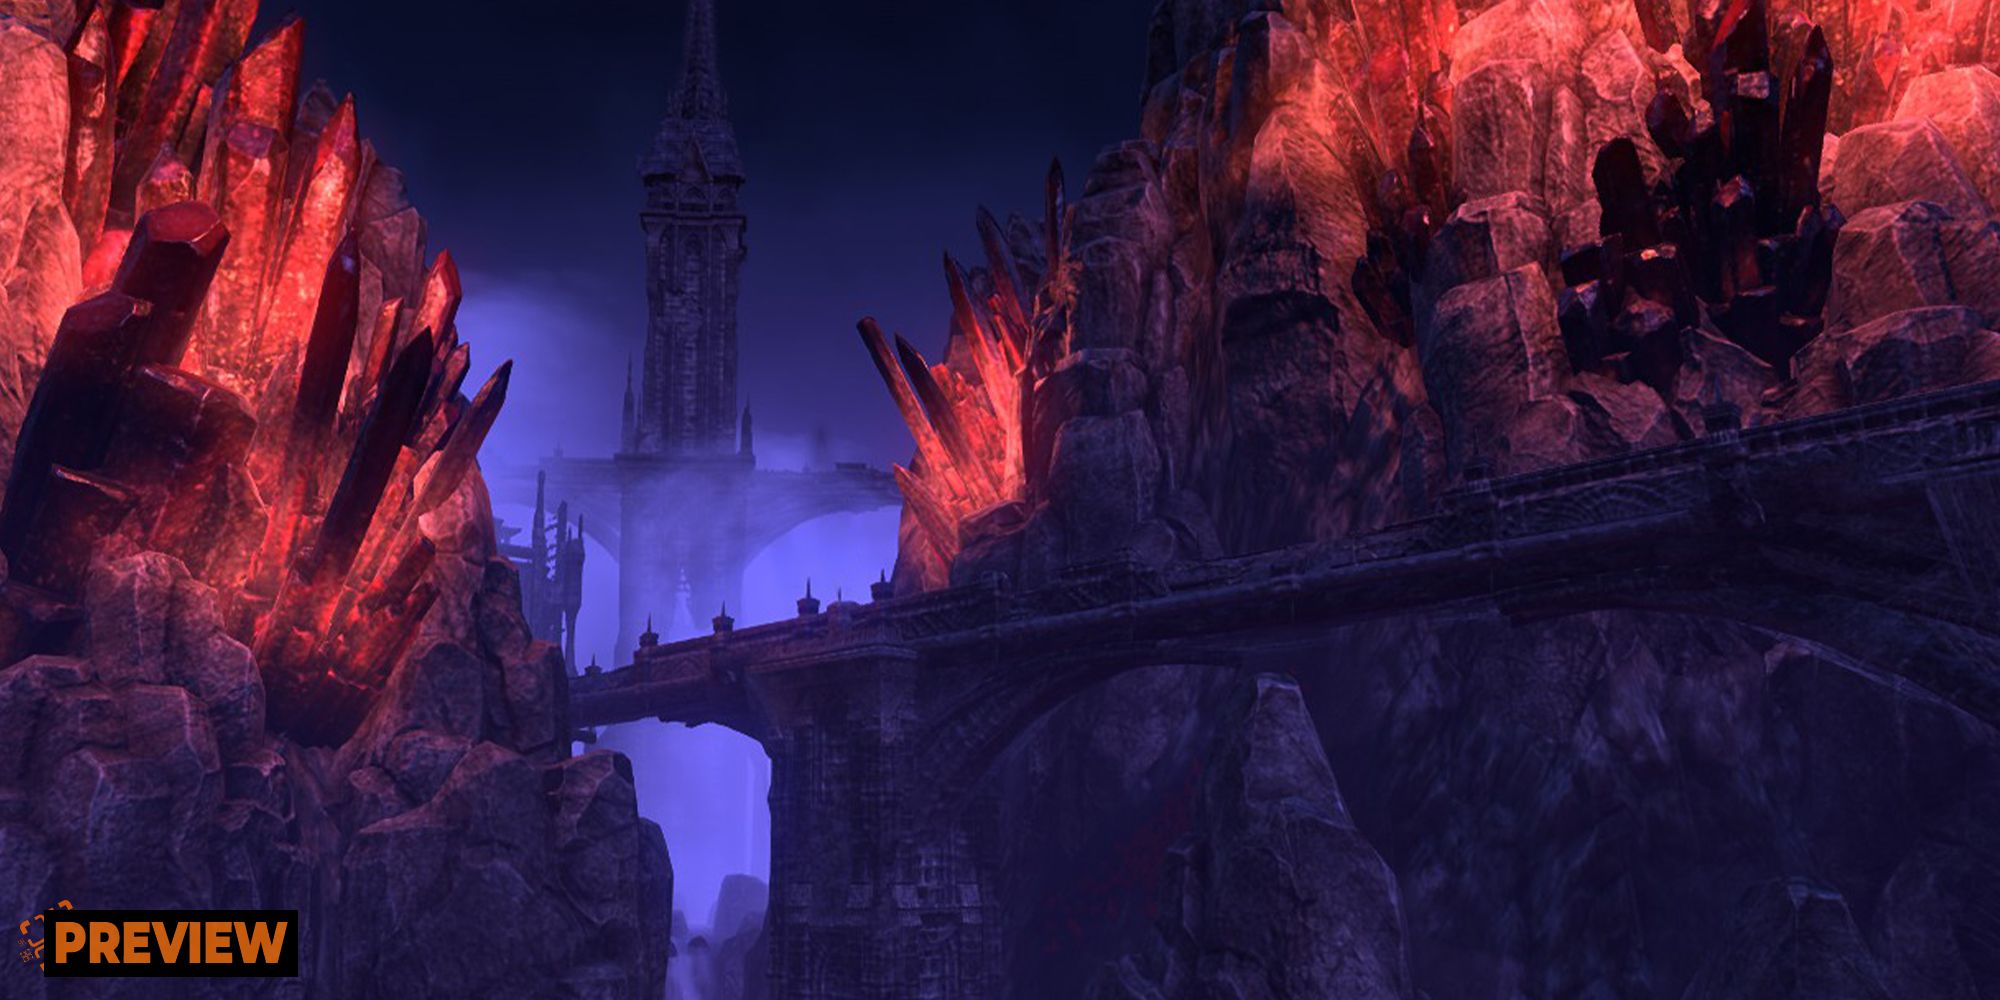 Elder Scrolls Online Mephala's Daedric Realm, giant bridges through misty mountains with red crystals sprouting out